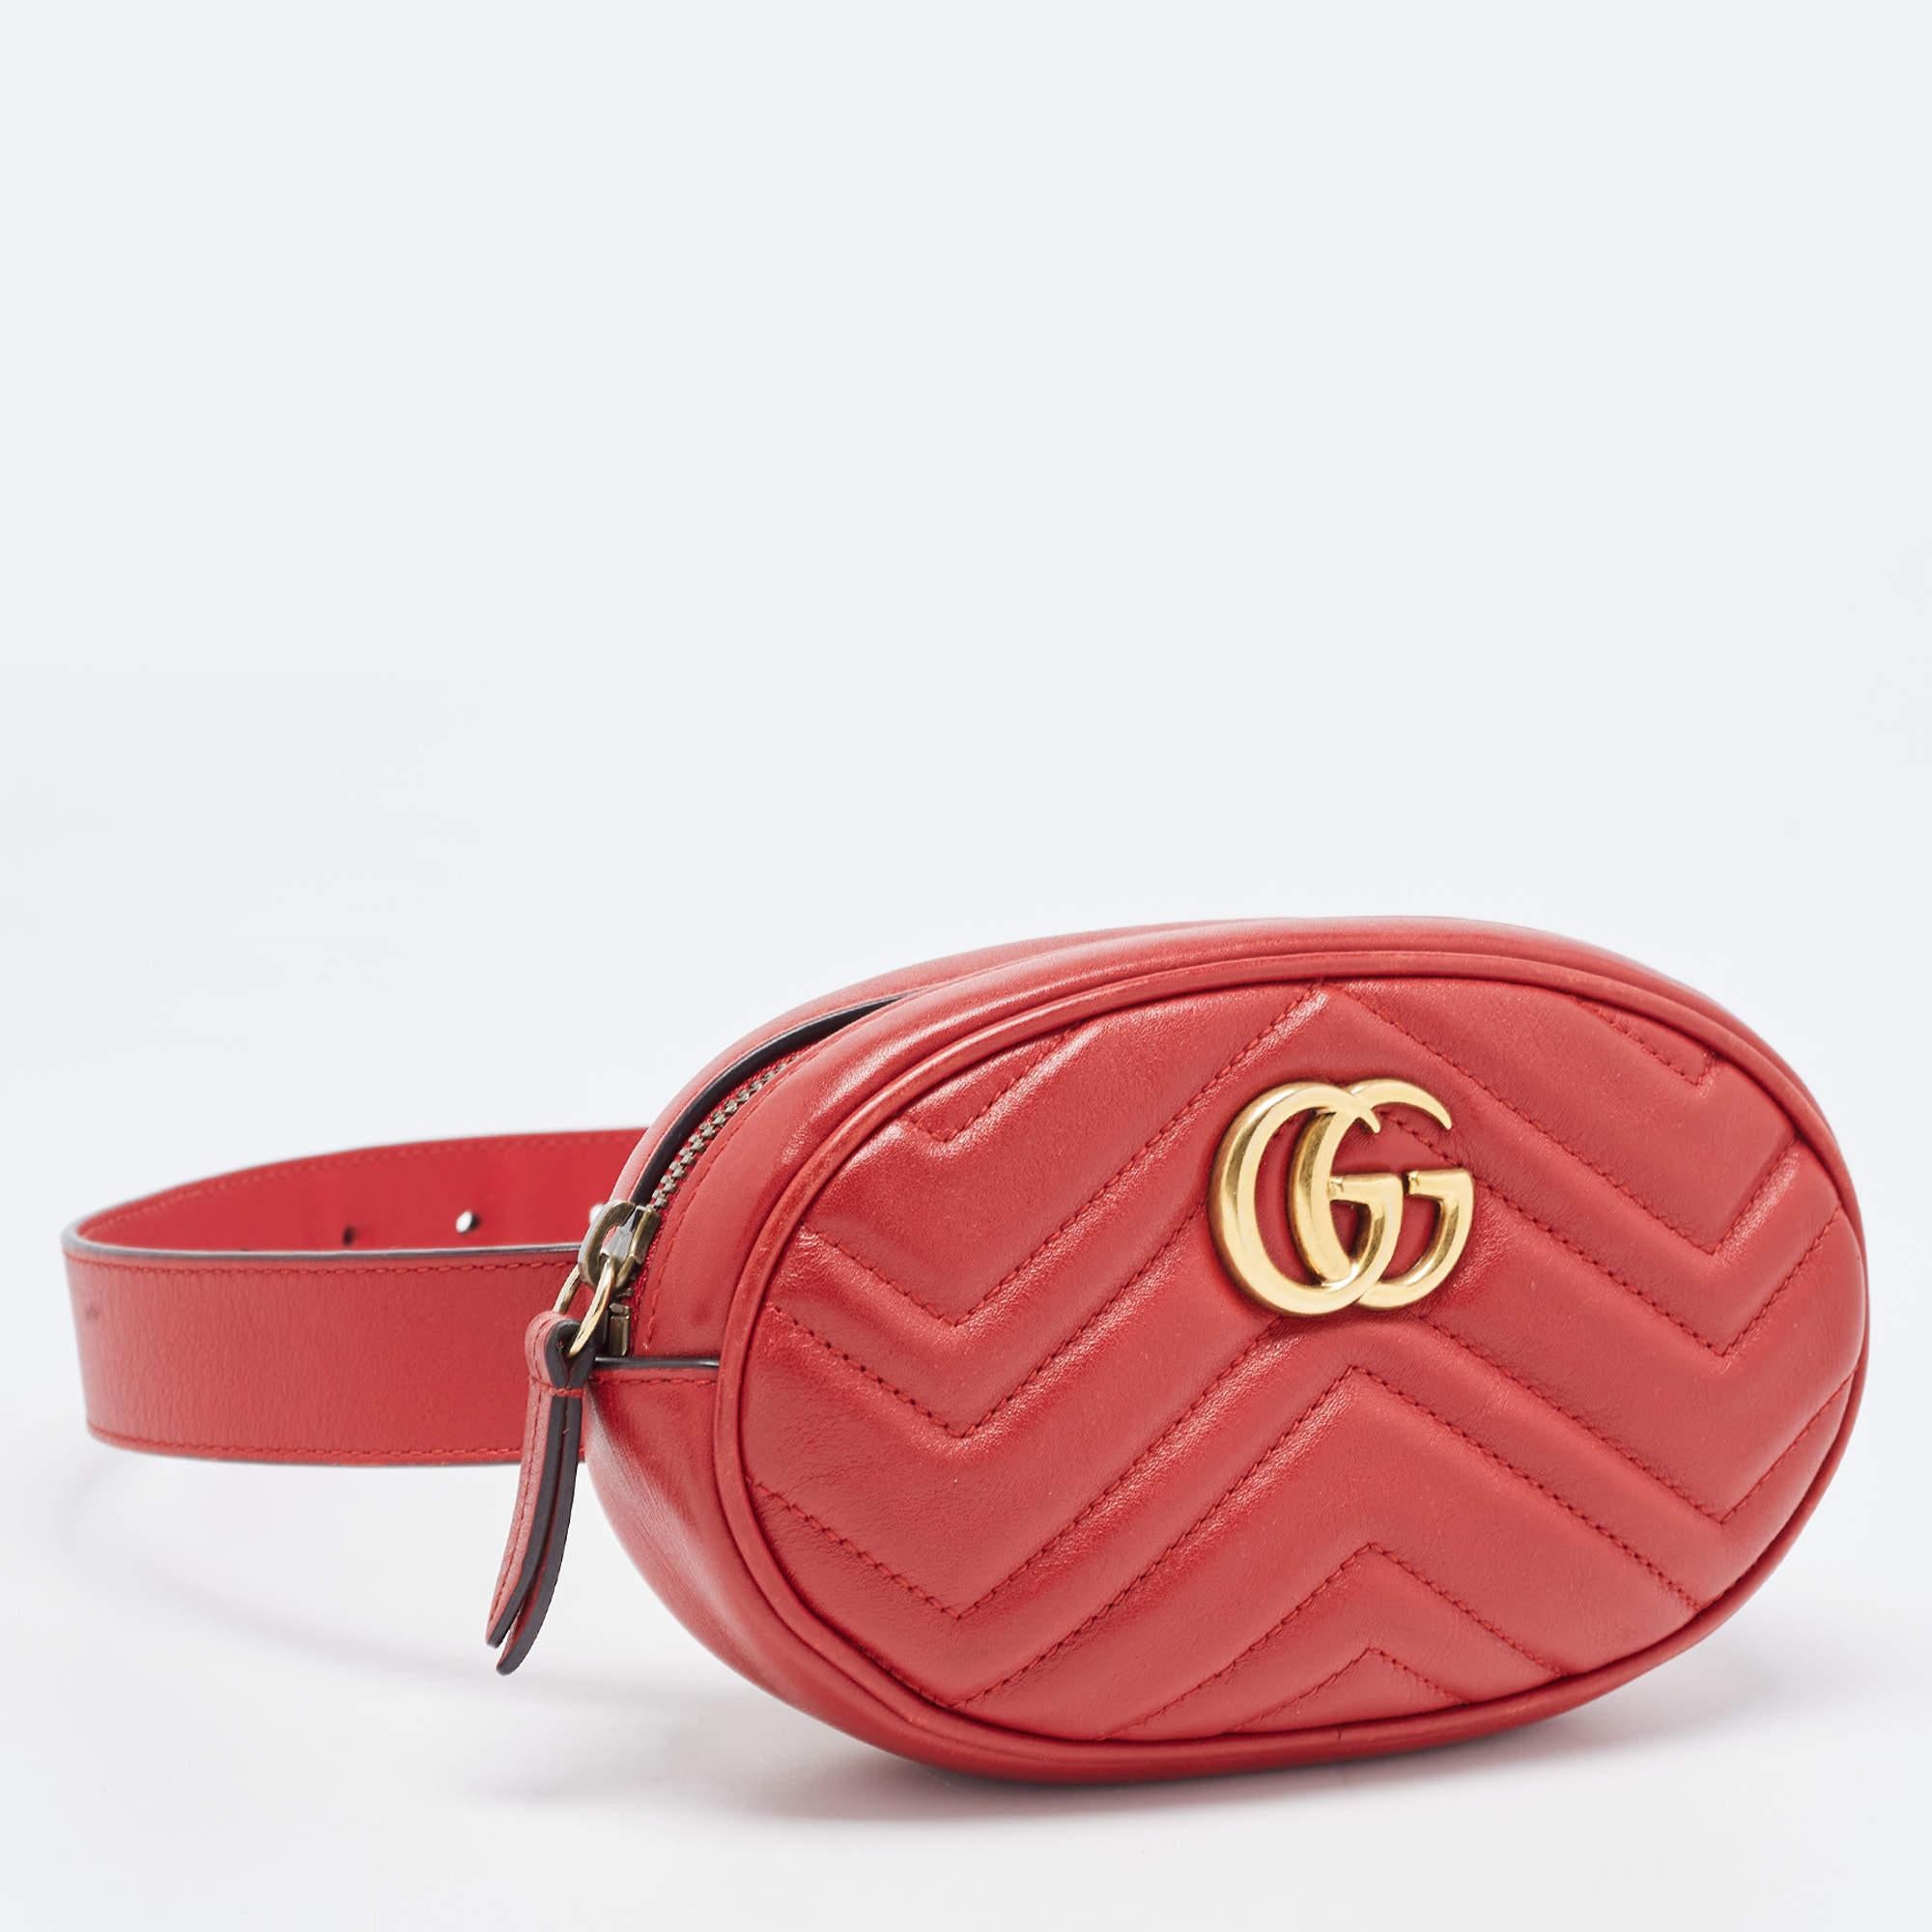 The Gucci GG Marmont belt bag is a stylish and versatile accessory. Crafted from red leather with matelassé stitching, it features the iconic GG logo, a flap closure, and an adjustable belt strap. Perfect for hands-free convenience and adding a